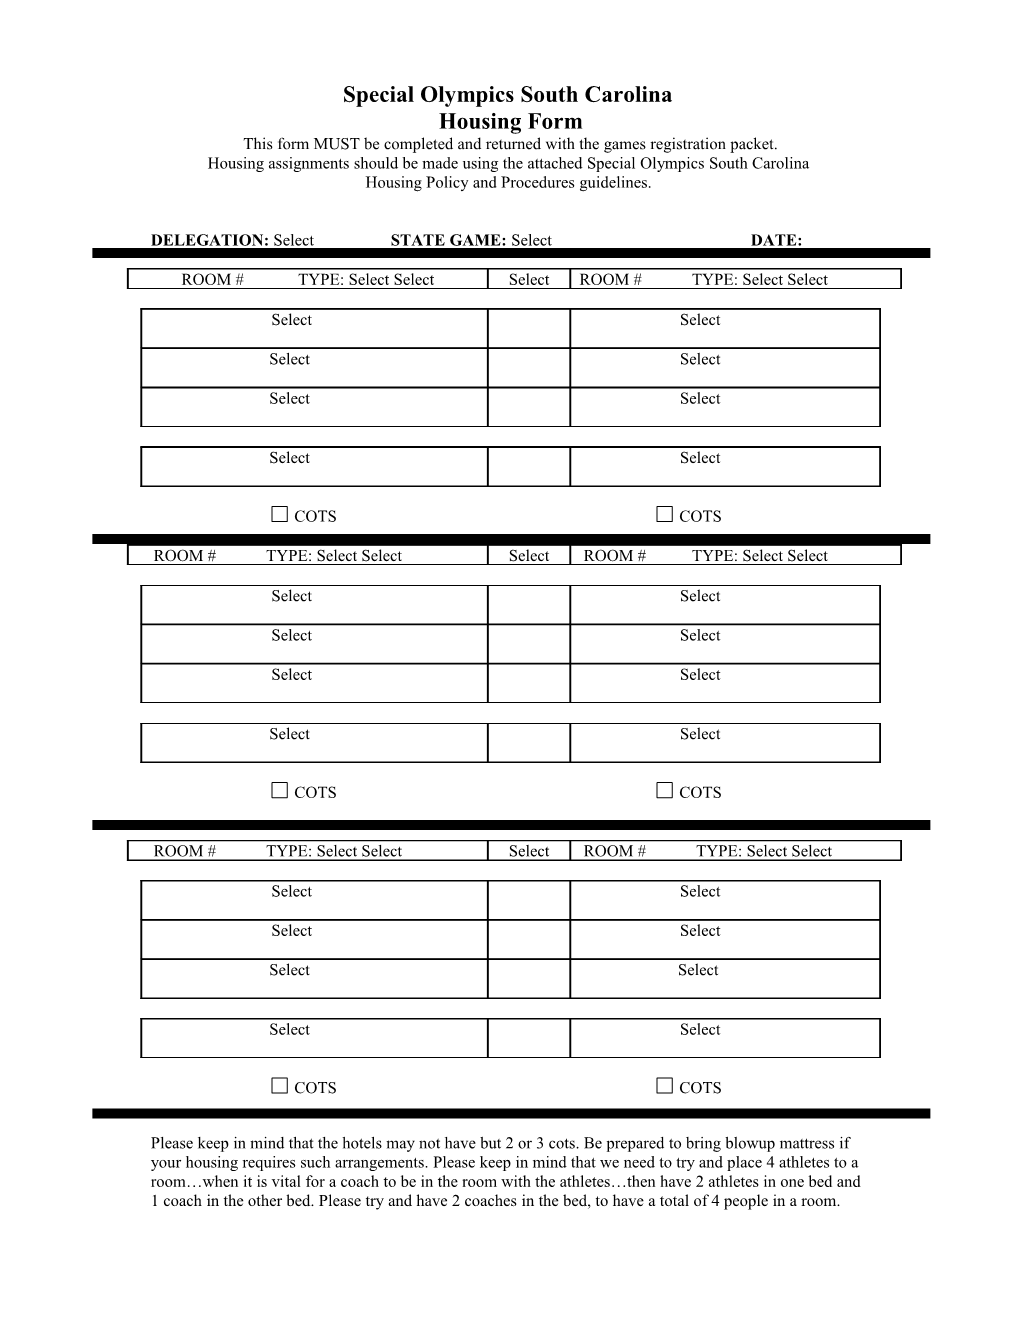 State Games Housing Form